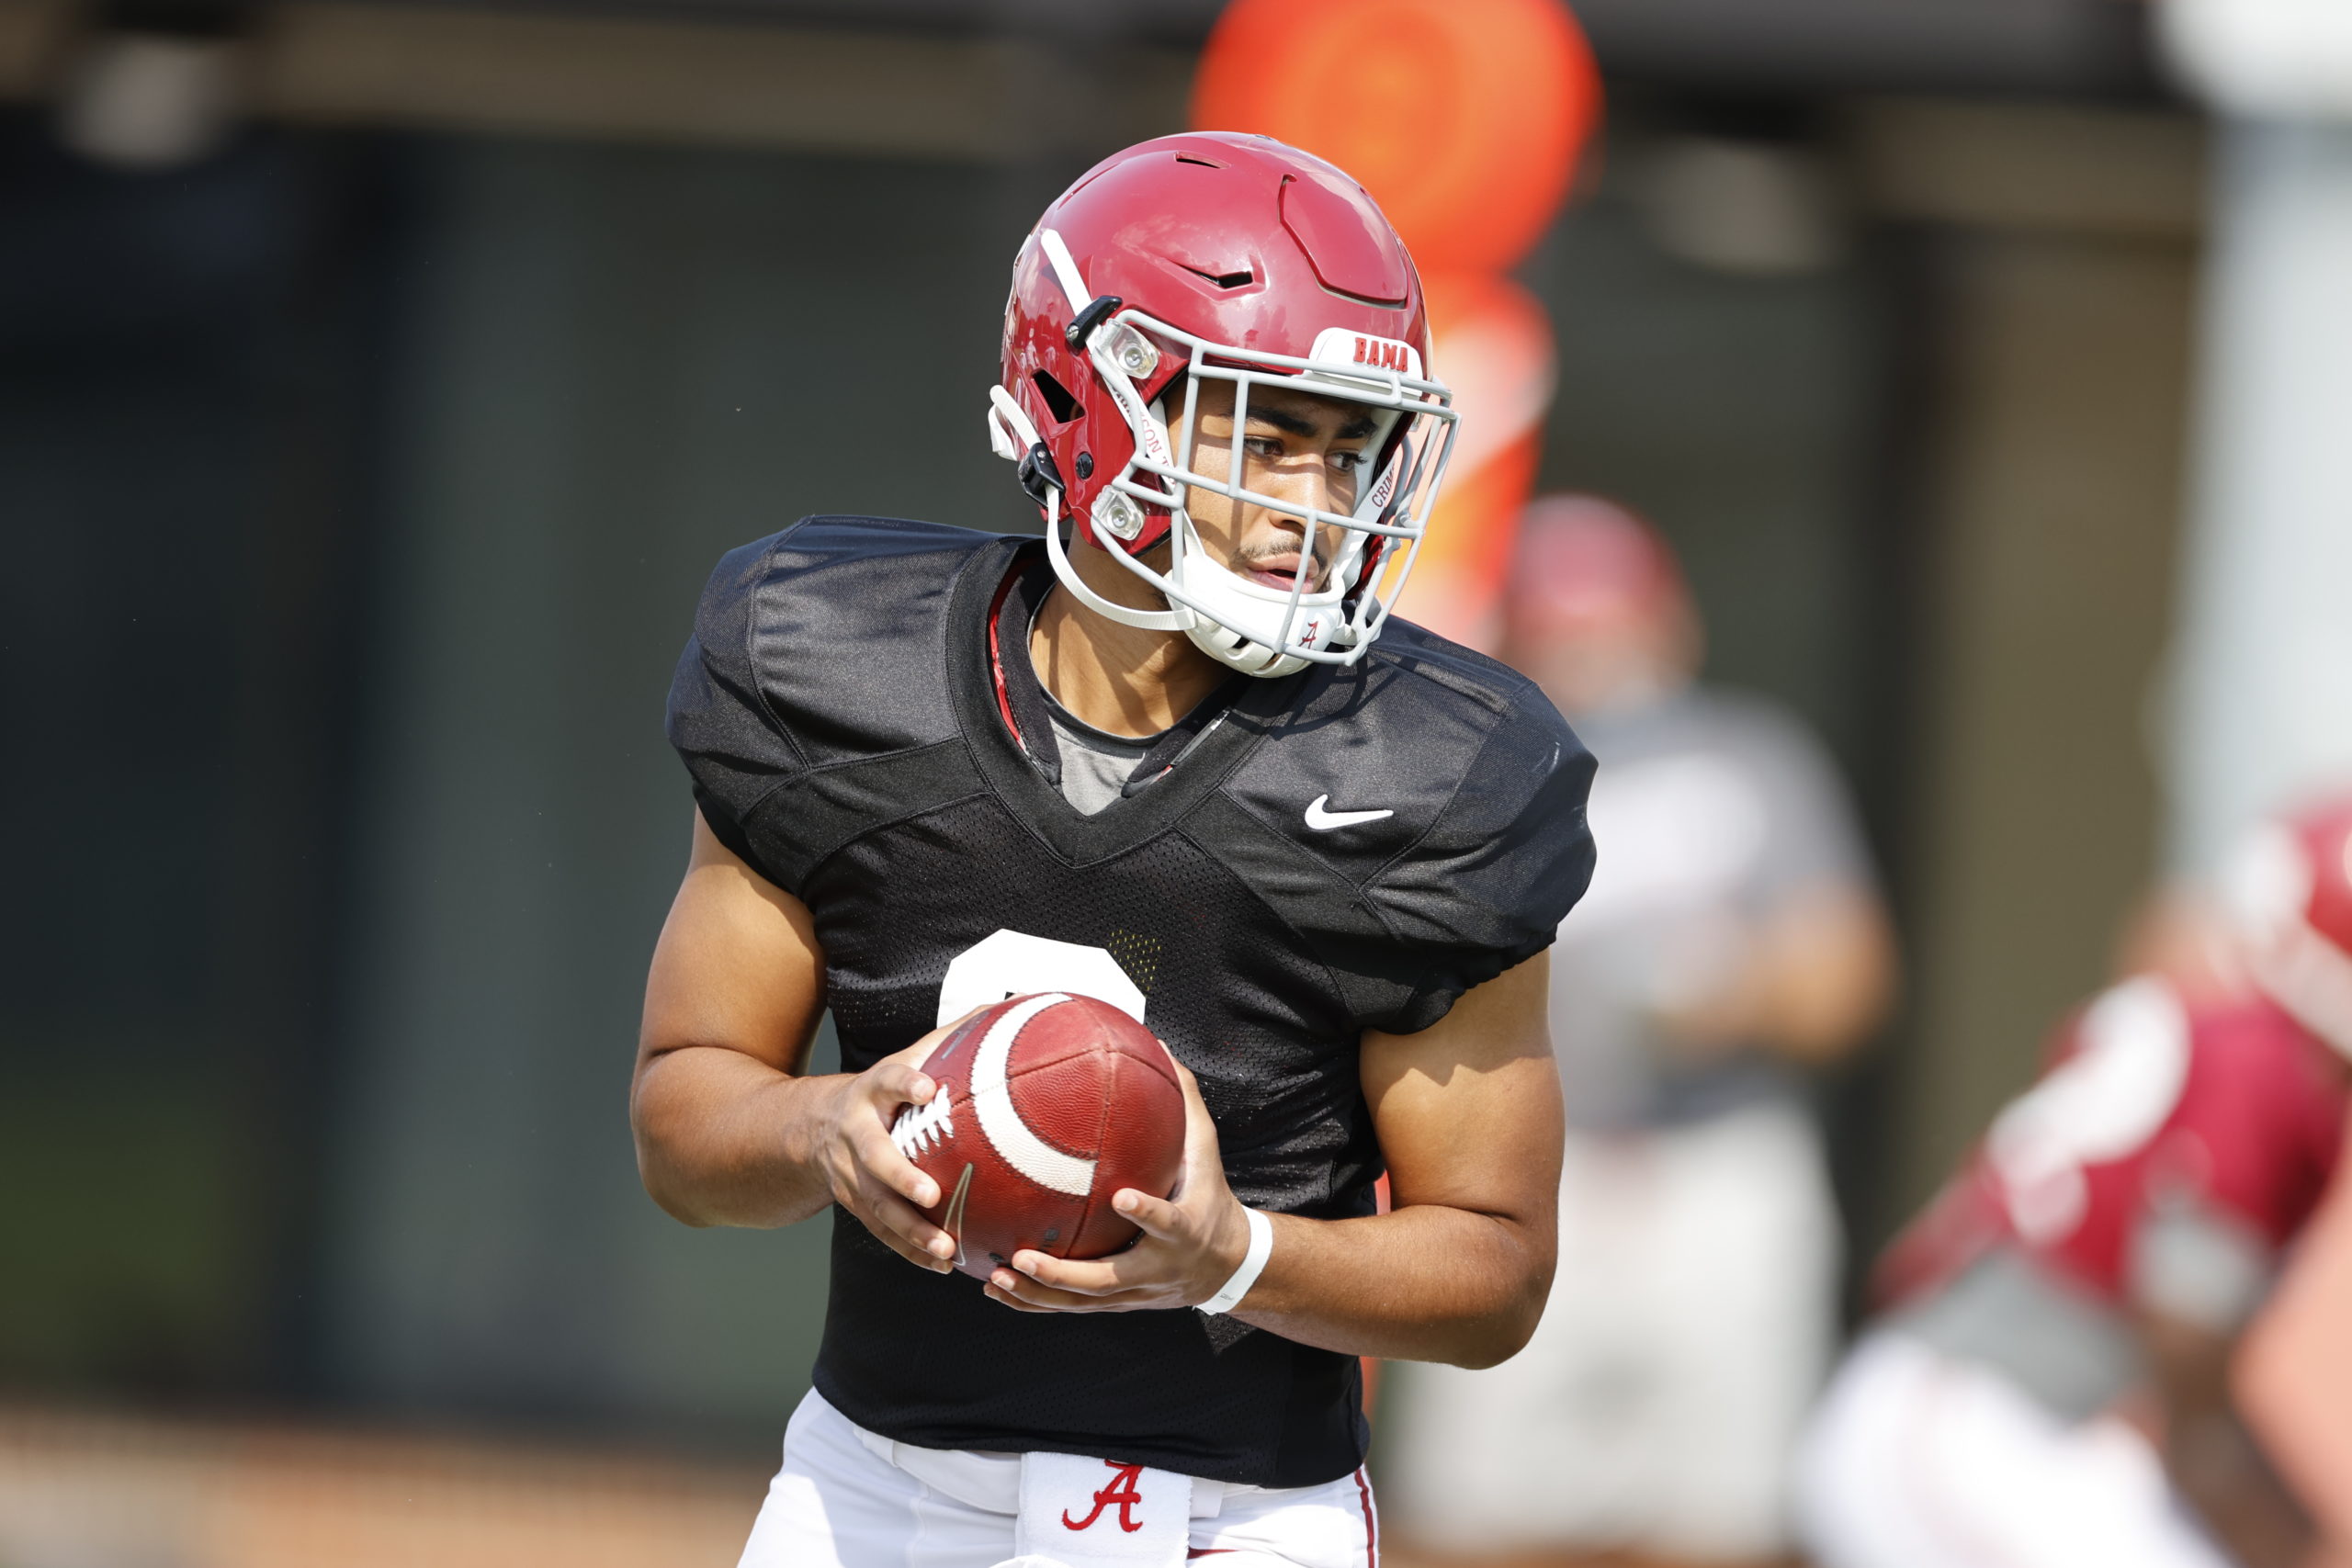 Bryce young prepares for A-Day during spring practice